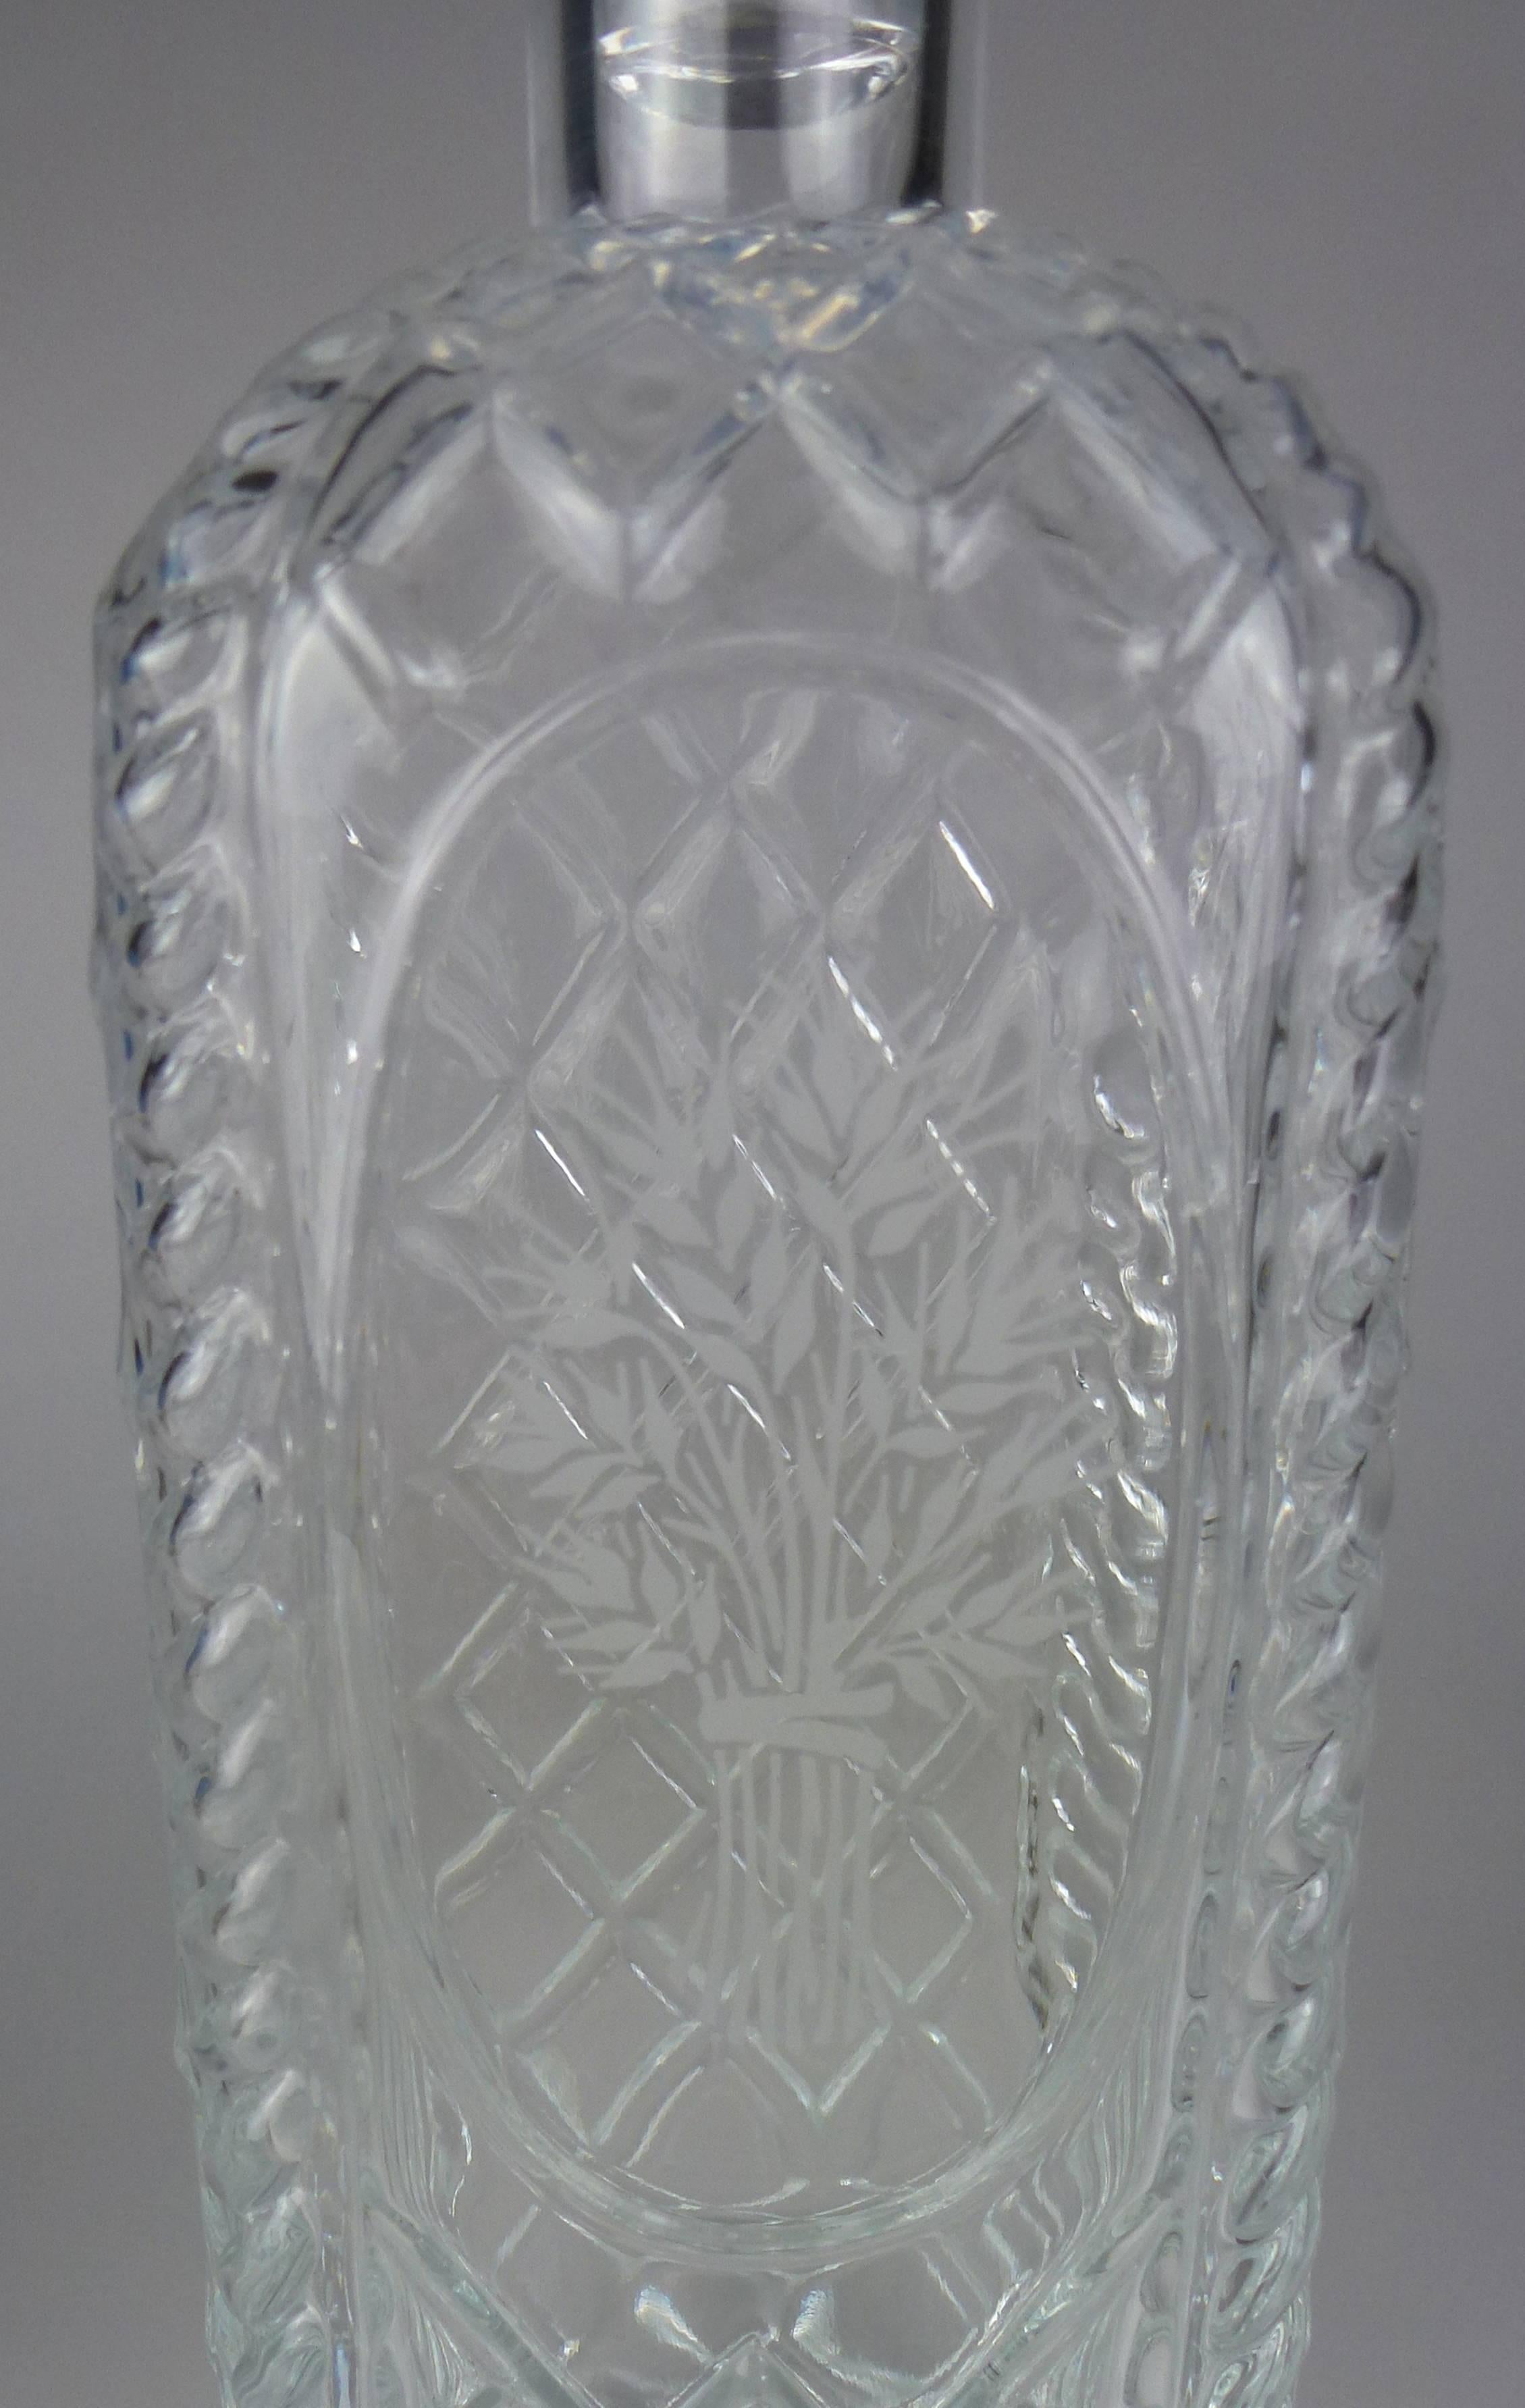 French rectangular glass spirit decanter and stopper, cut all over in the 'brilliant' style with diamonds and cables to the edges, one side engraved with a sheaf of rye wheat within an oval, with lapidary-cut mushroom-form stopper.

Marked Made in